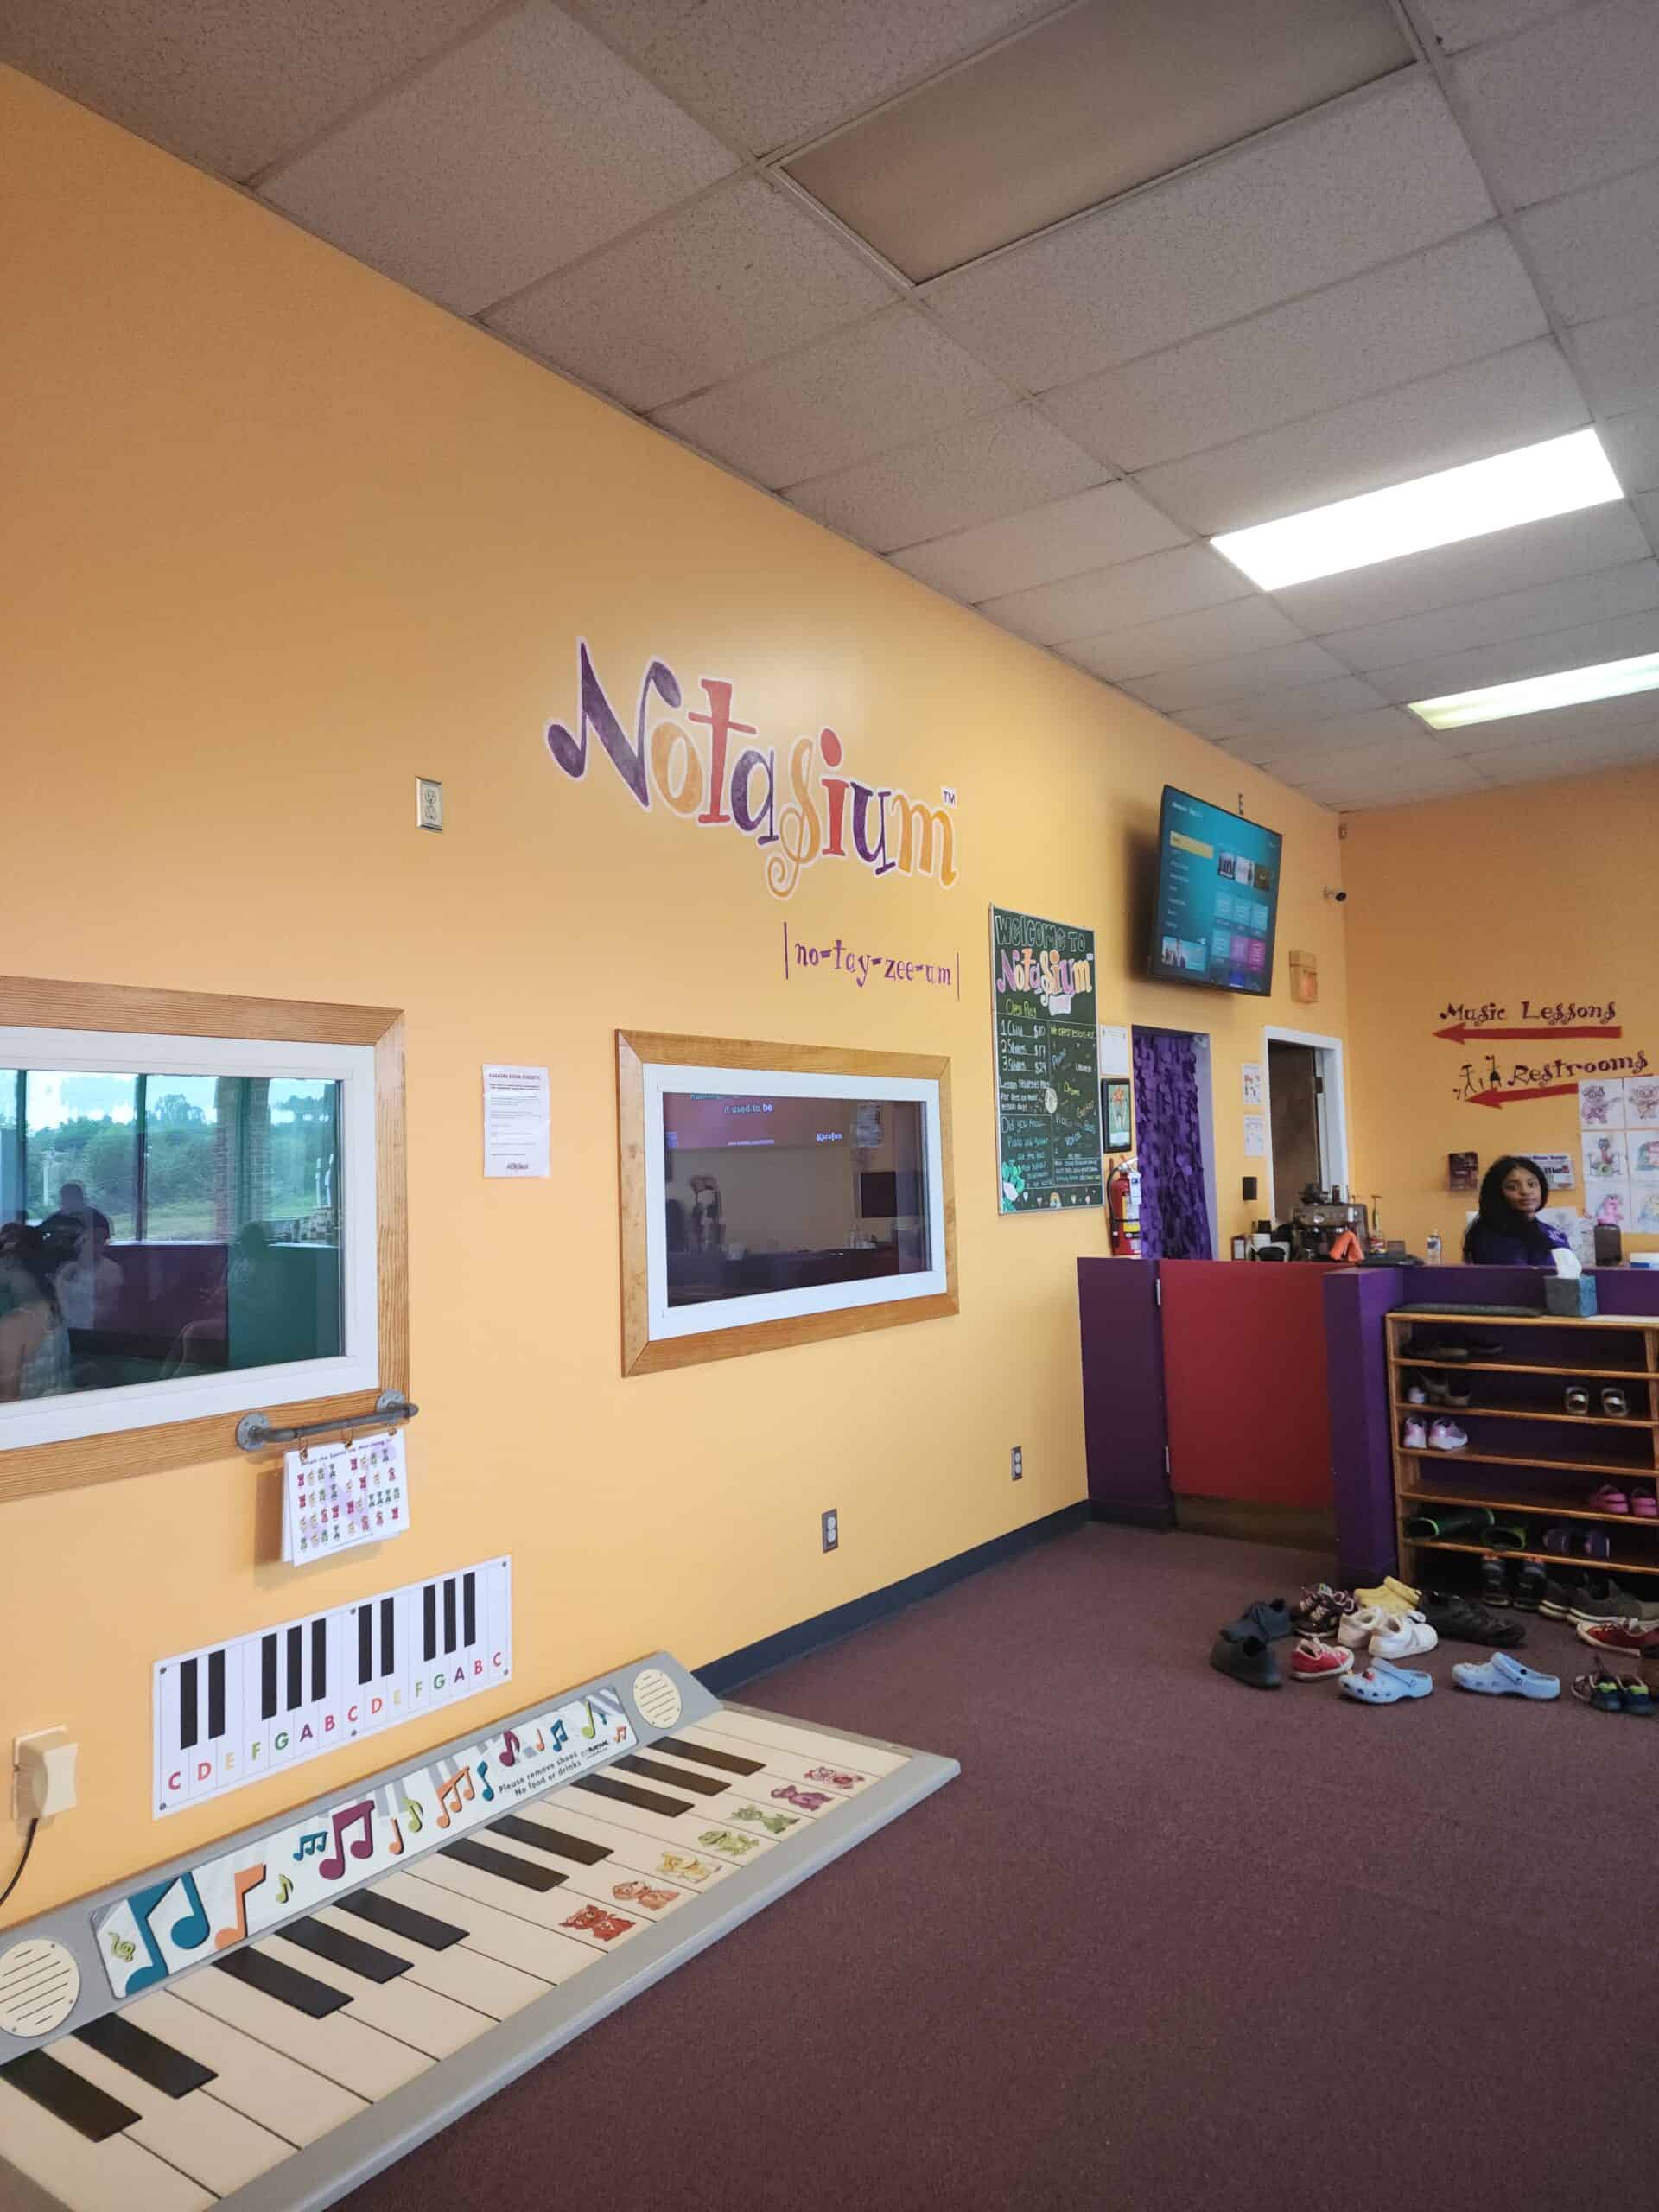 interior of Notasium play space in Durham. in the image is the name Notasium written on a yellow wall, with a floor play piano on the ground. 